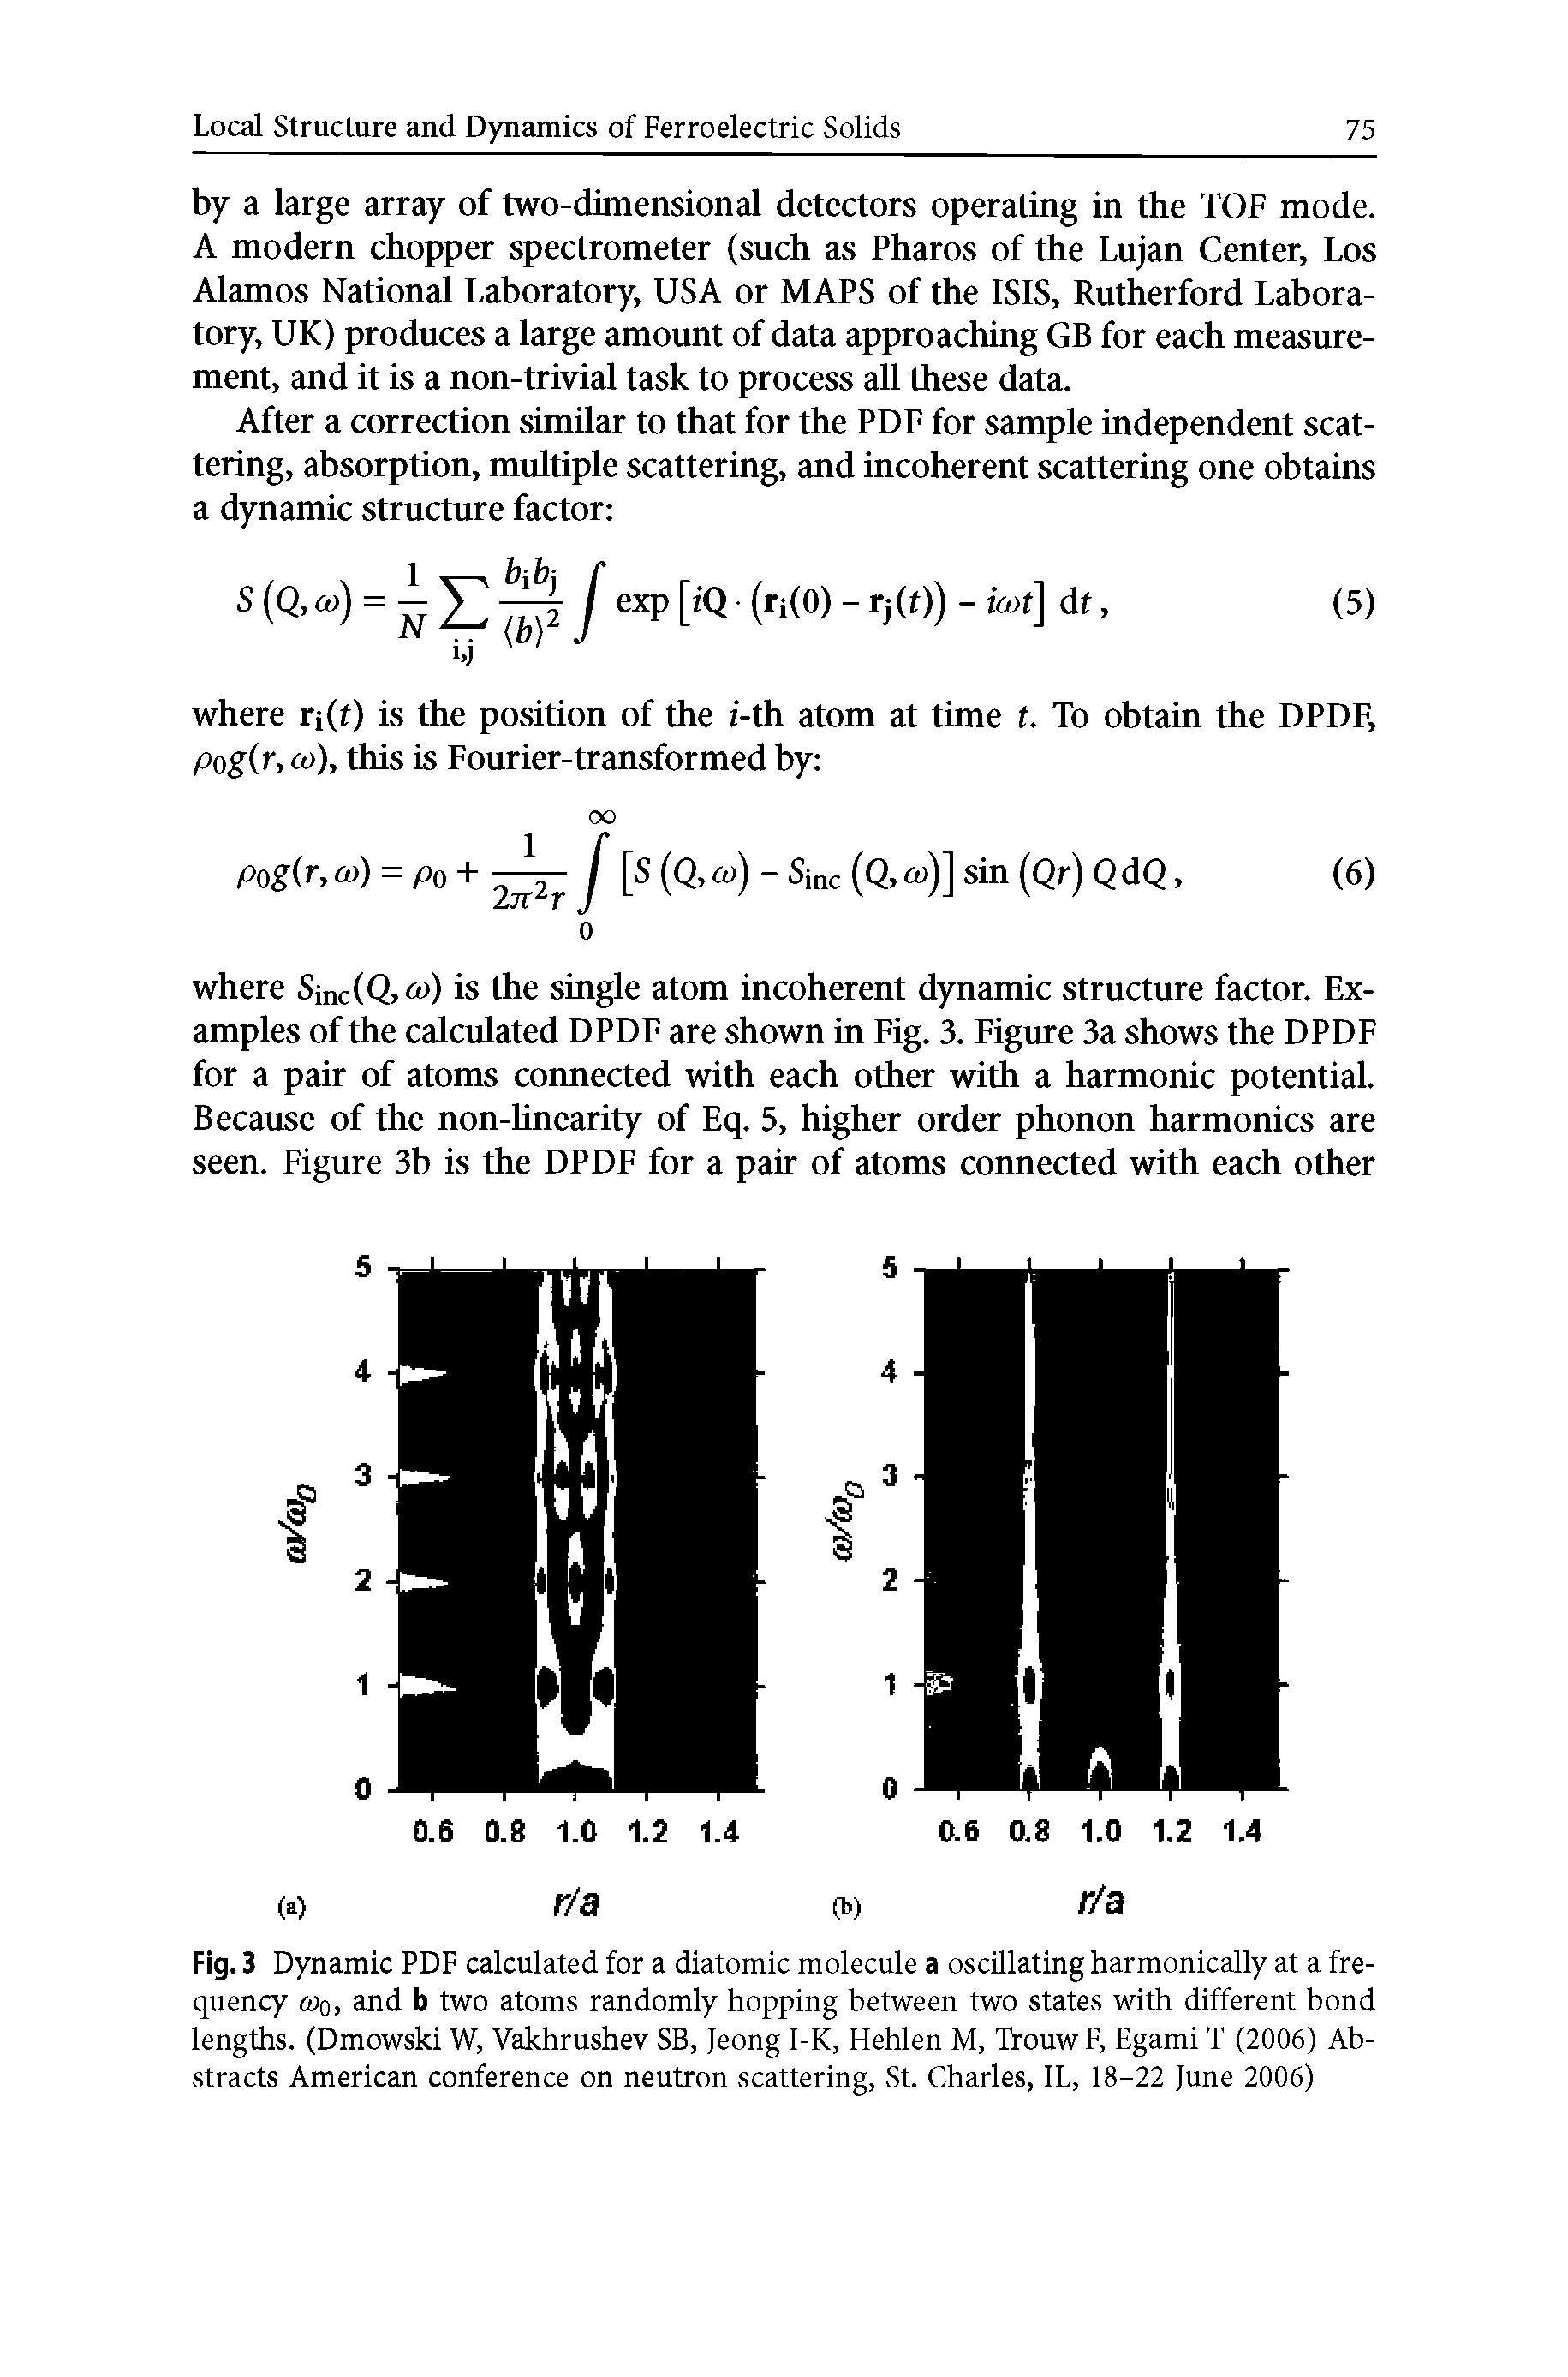 Fig. 3 Dynamic PDF calculated for a diatomic molecule a oscillating harmonically at a frequency a>o, and b two atoms randomly hopping between two states with different bond lengths. (Dmowski W, Vakhrushev SB, Jeong I-K, Hehlen M, Trouw F, Egami T (2006) Abstracts American conference on neutron scattering, St. Charles, IL, 18-22 June 2006)...